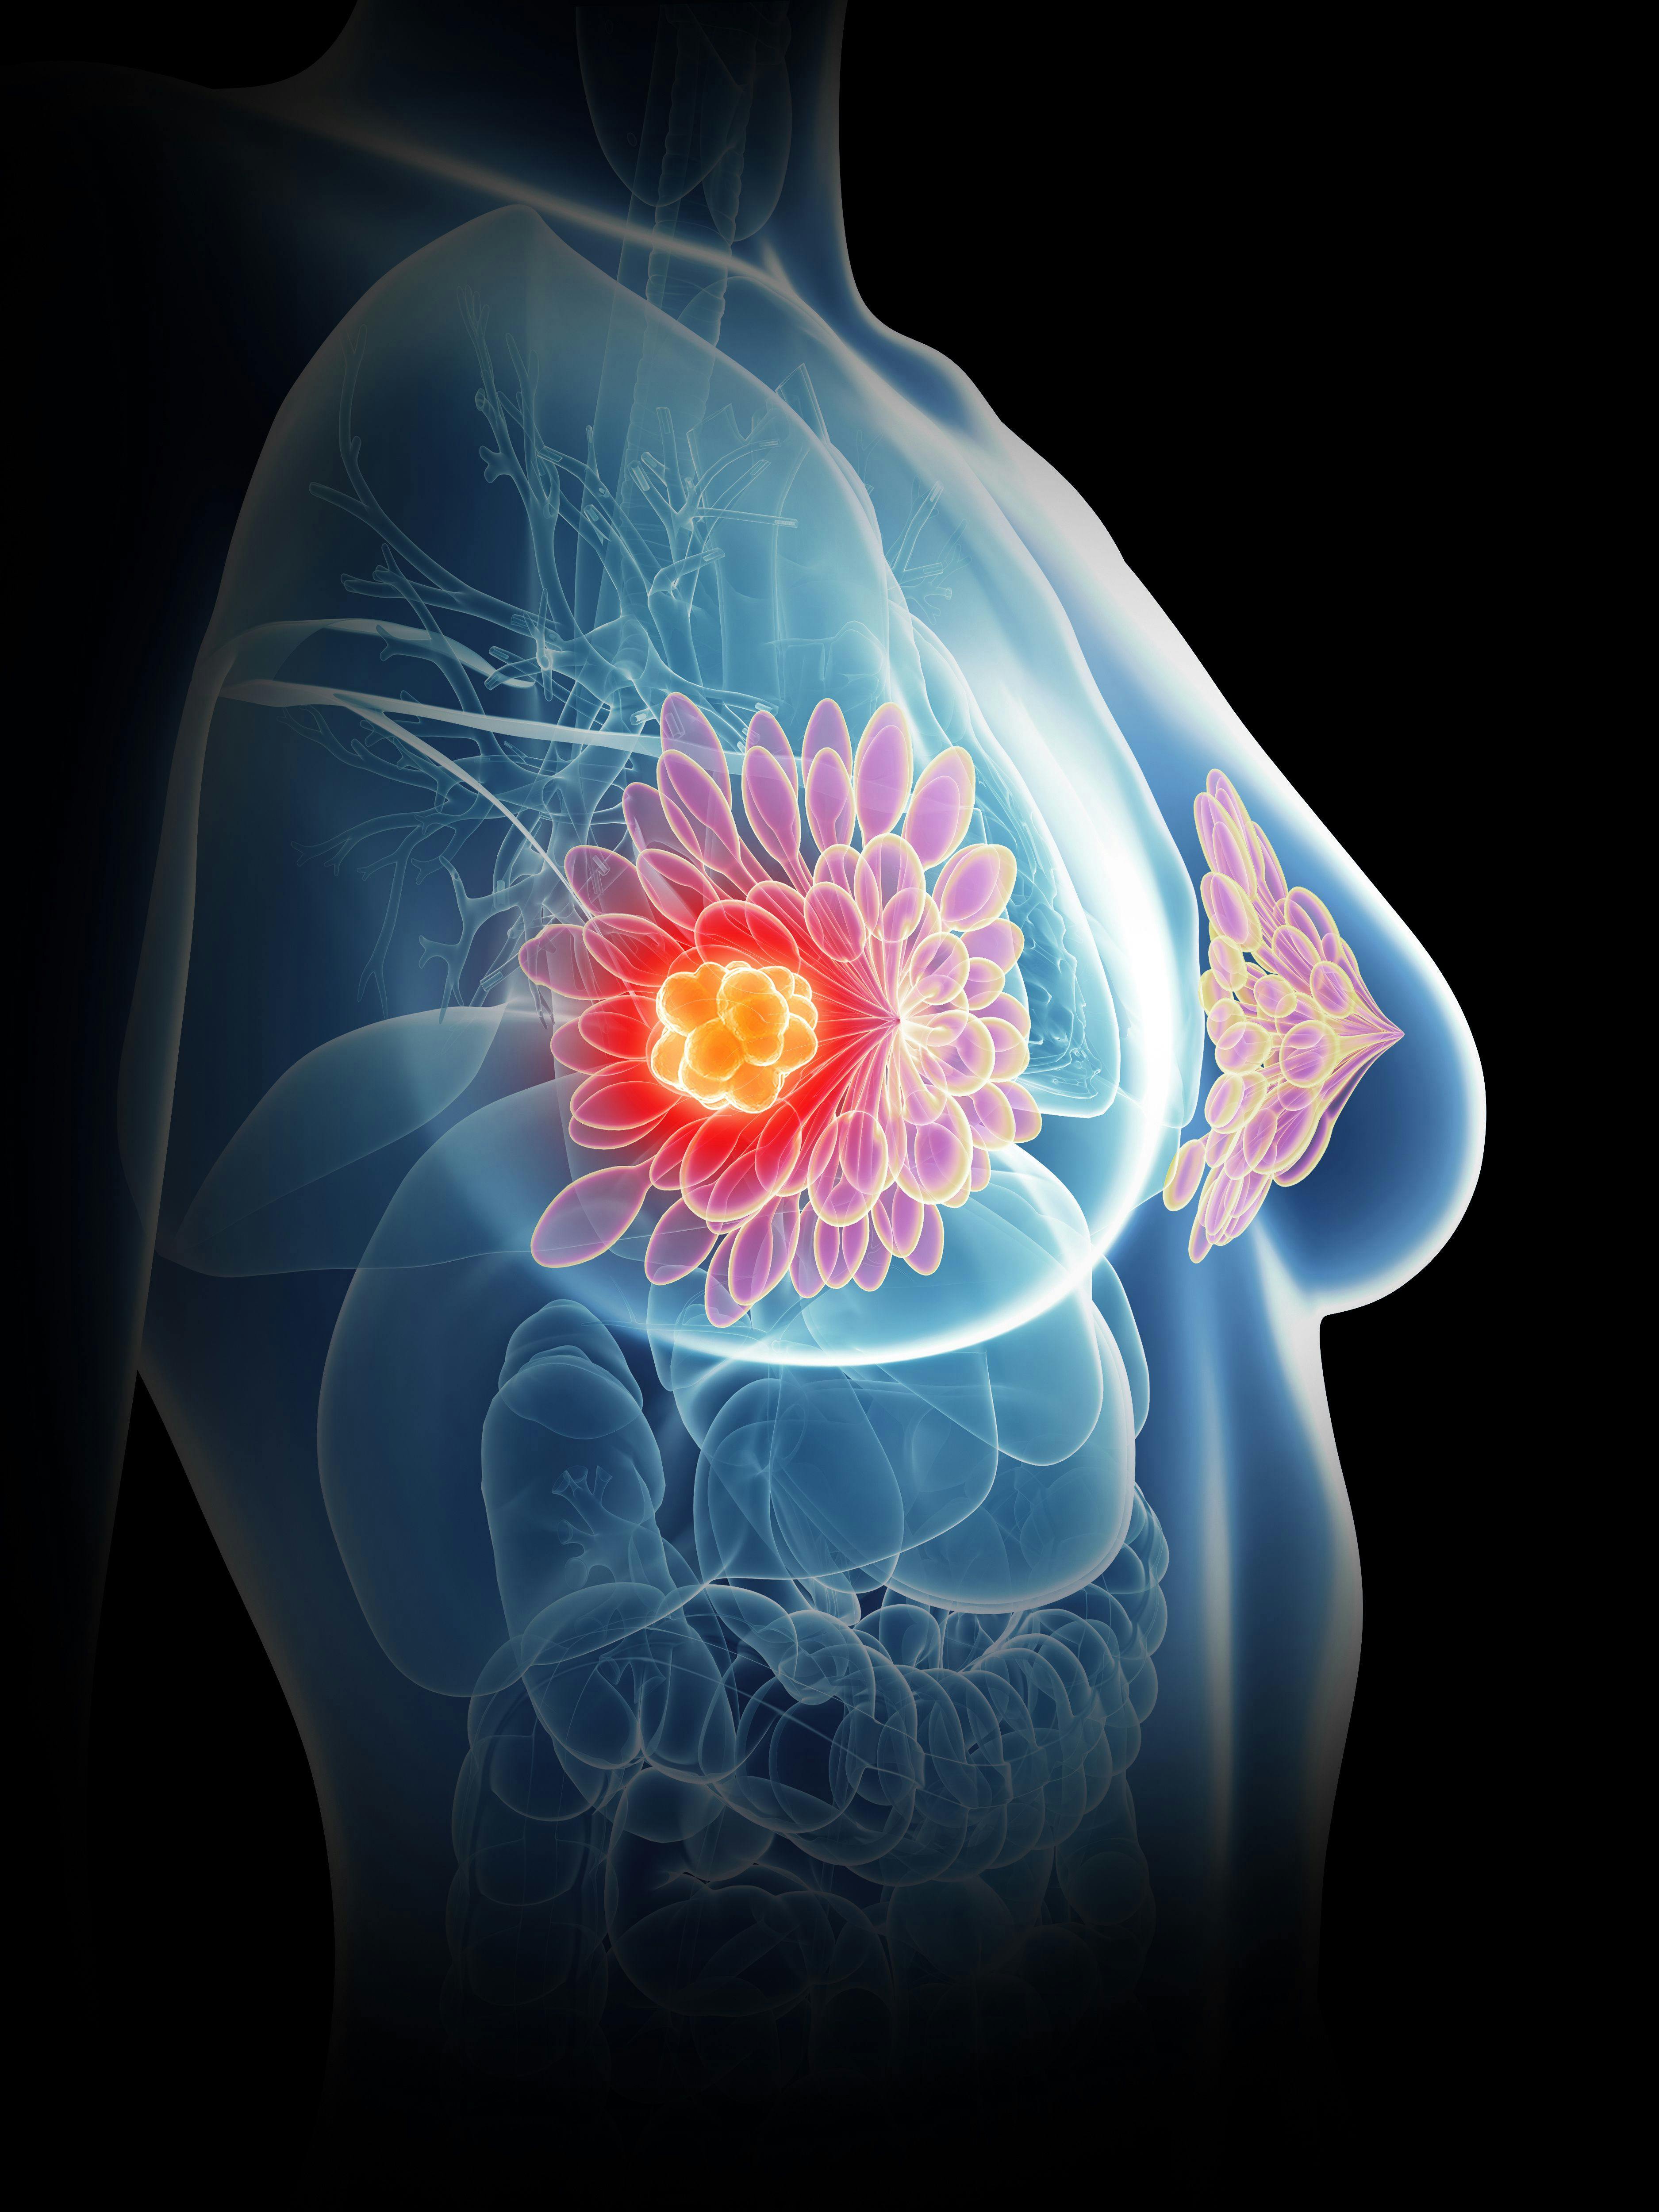 Electron Intraoperative Radiotherapy Associated With Increased IBTR Rates for Early-Stage Breast Cancer